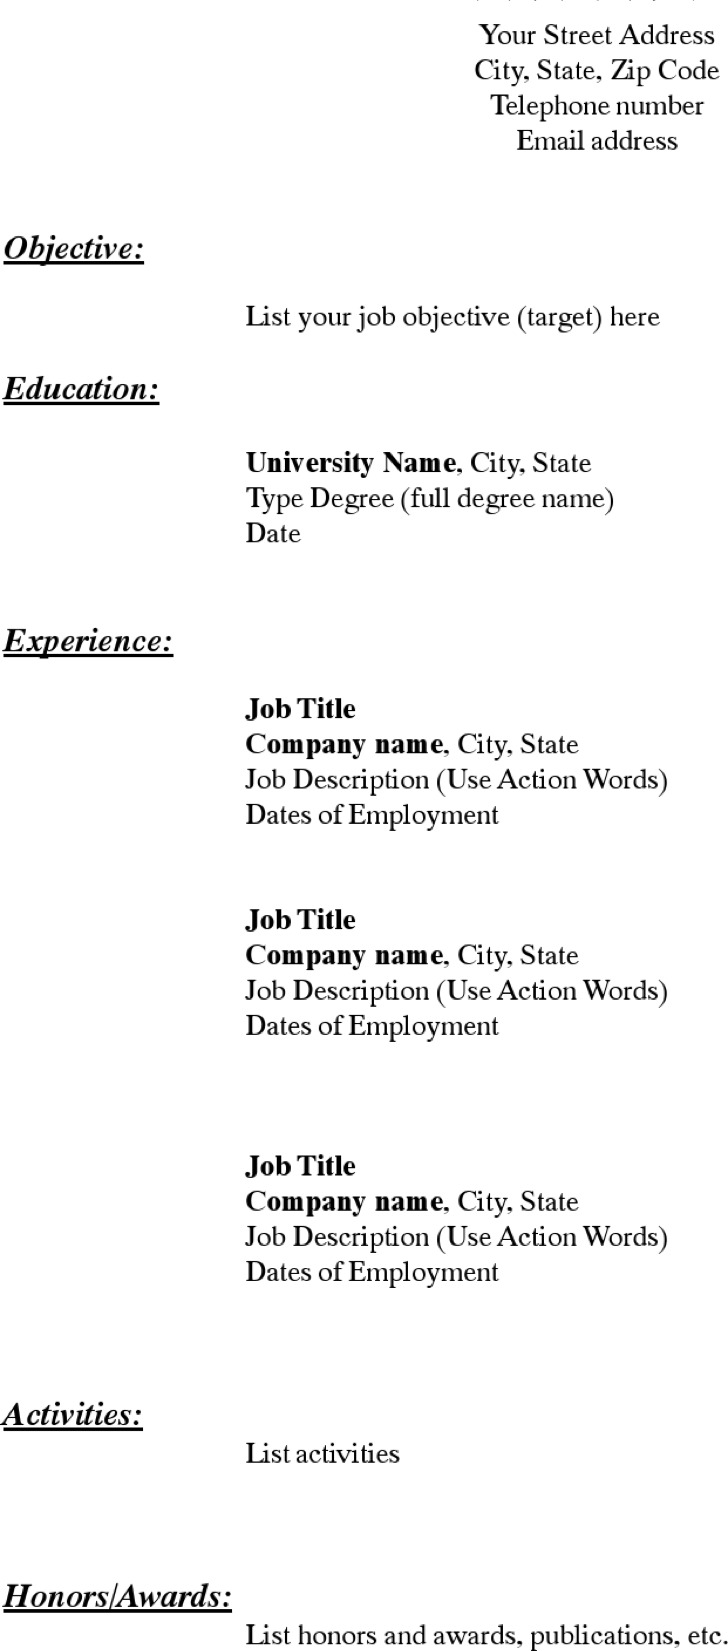 Resume Templates Free Download Blank Resume Template Chronological Format In Pdf Download resume templates free download|wikiresume.com